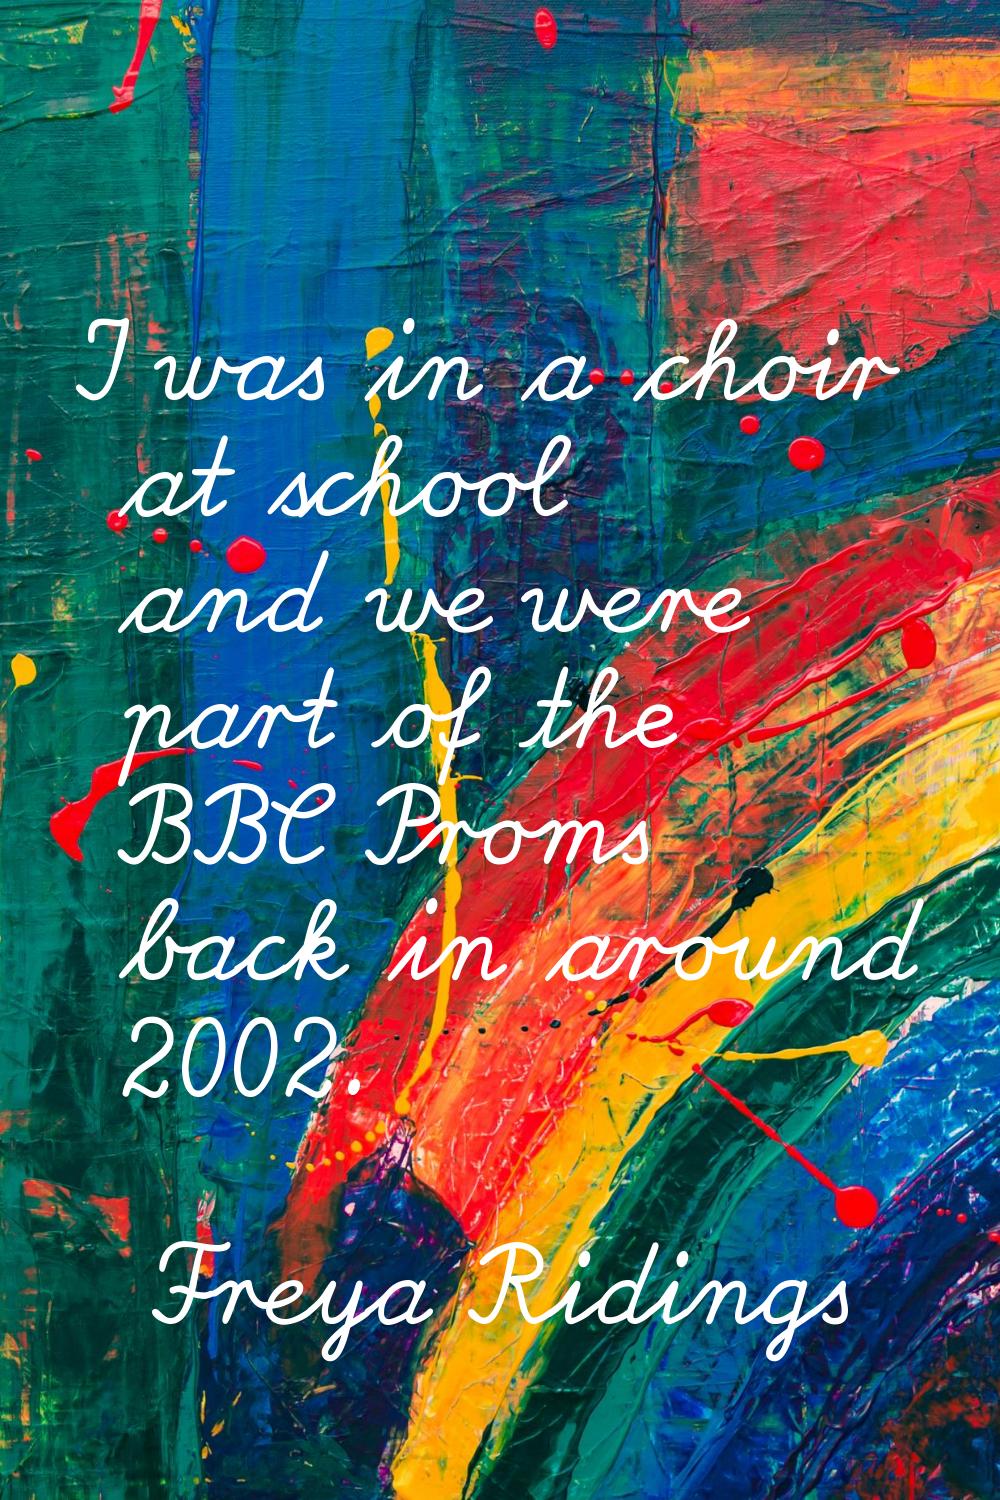 I was in a choir at school and we were part of the BBC Proms back in around 2002.